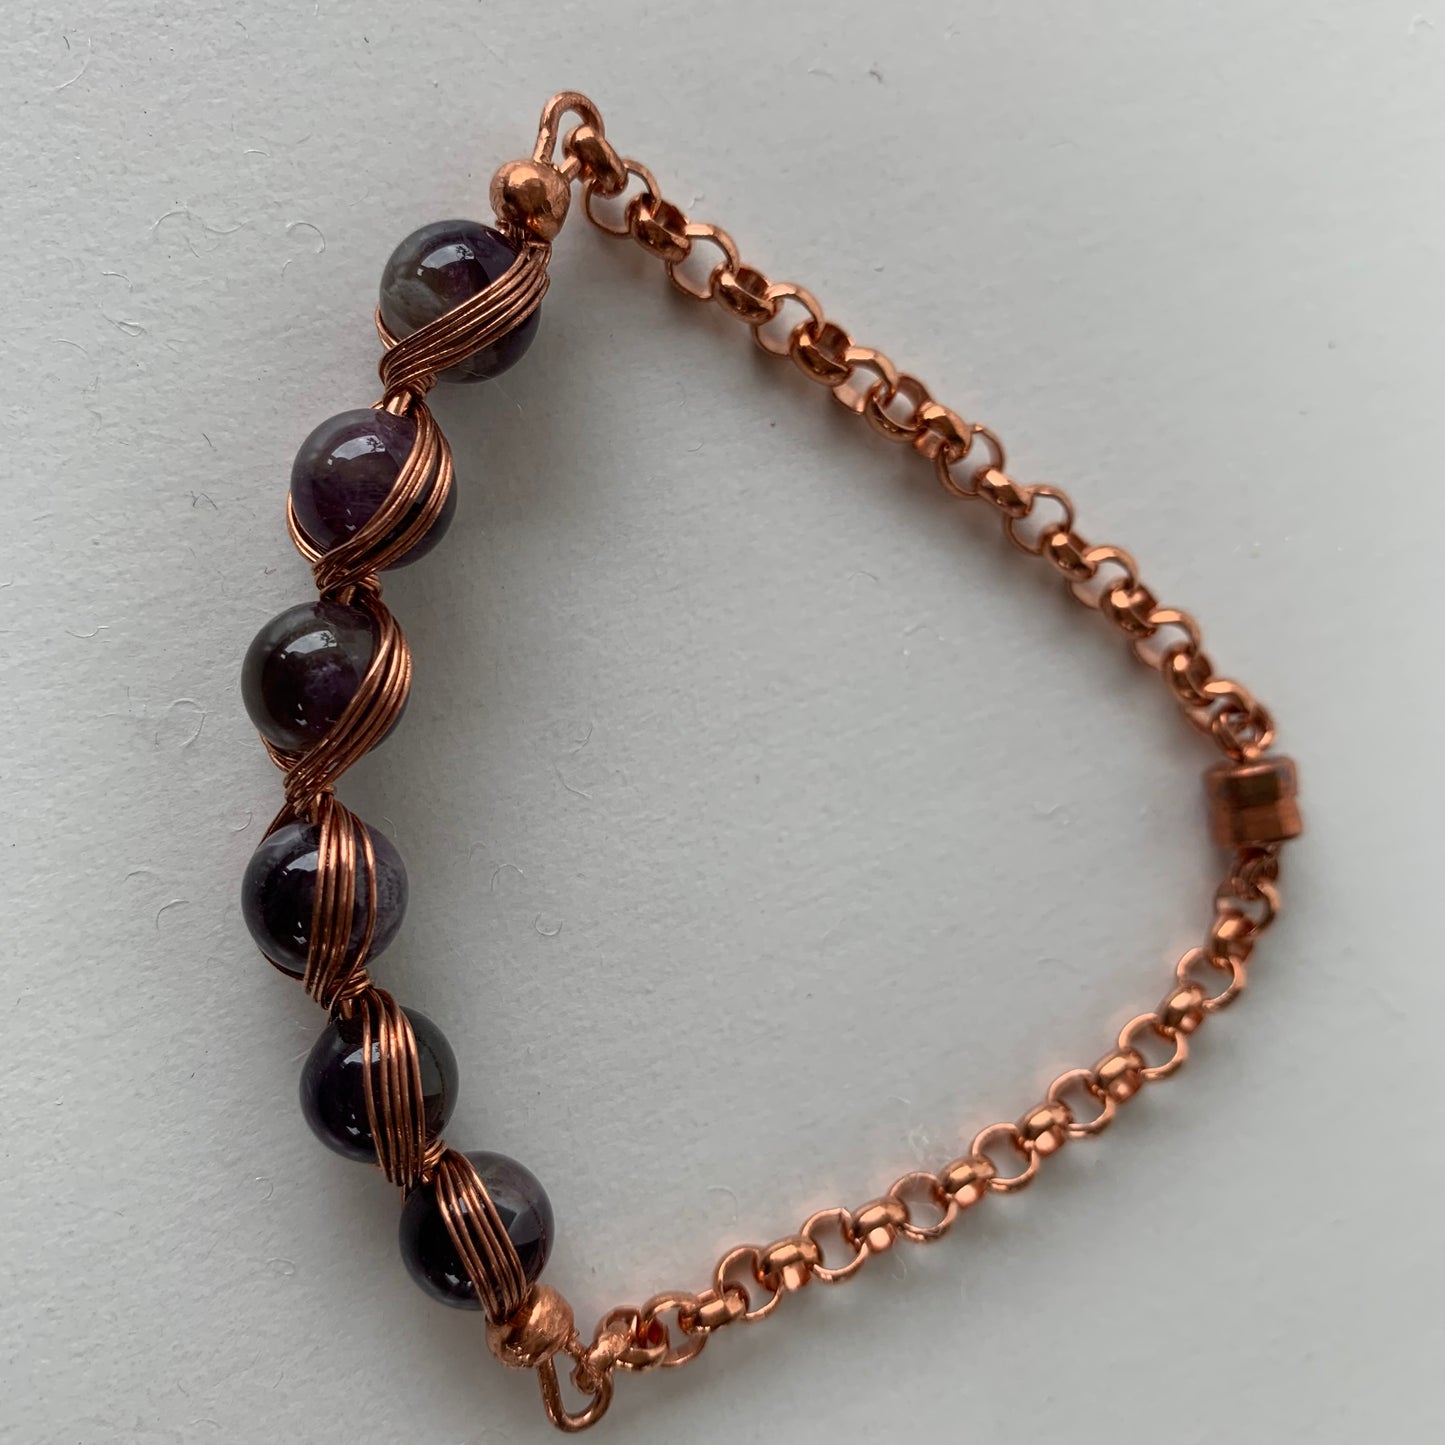 Amethyst Beads copper bracelet with copper magnet clasp